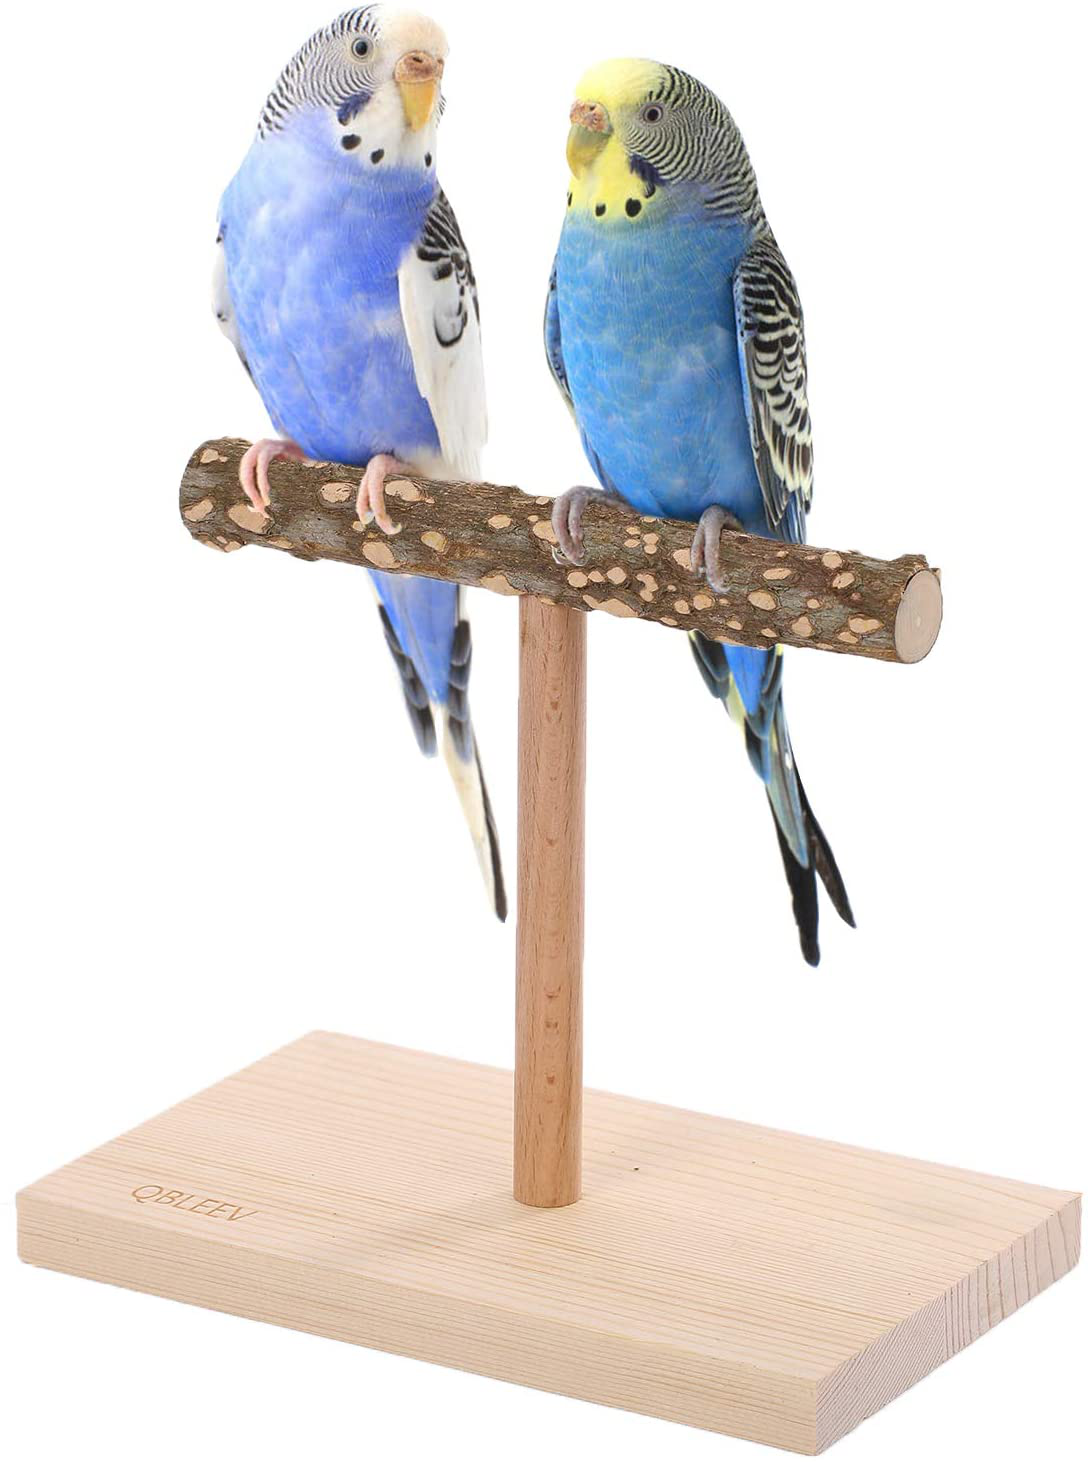 T Shape Bird Perch Stand. Natural Wood Bird Cage Perch For Budgie, Finch,  Parrot